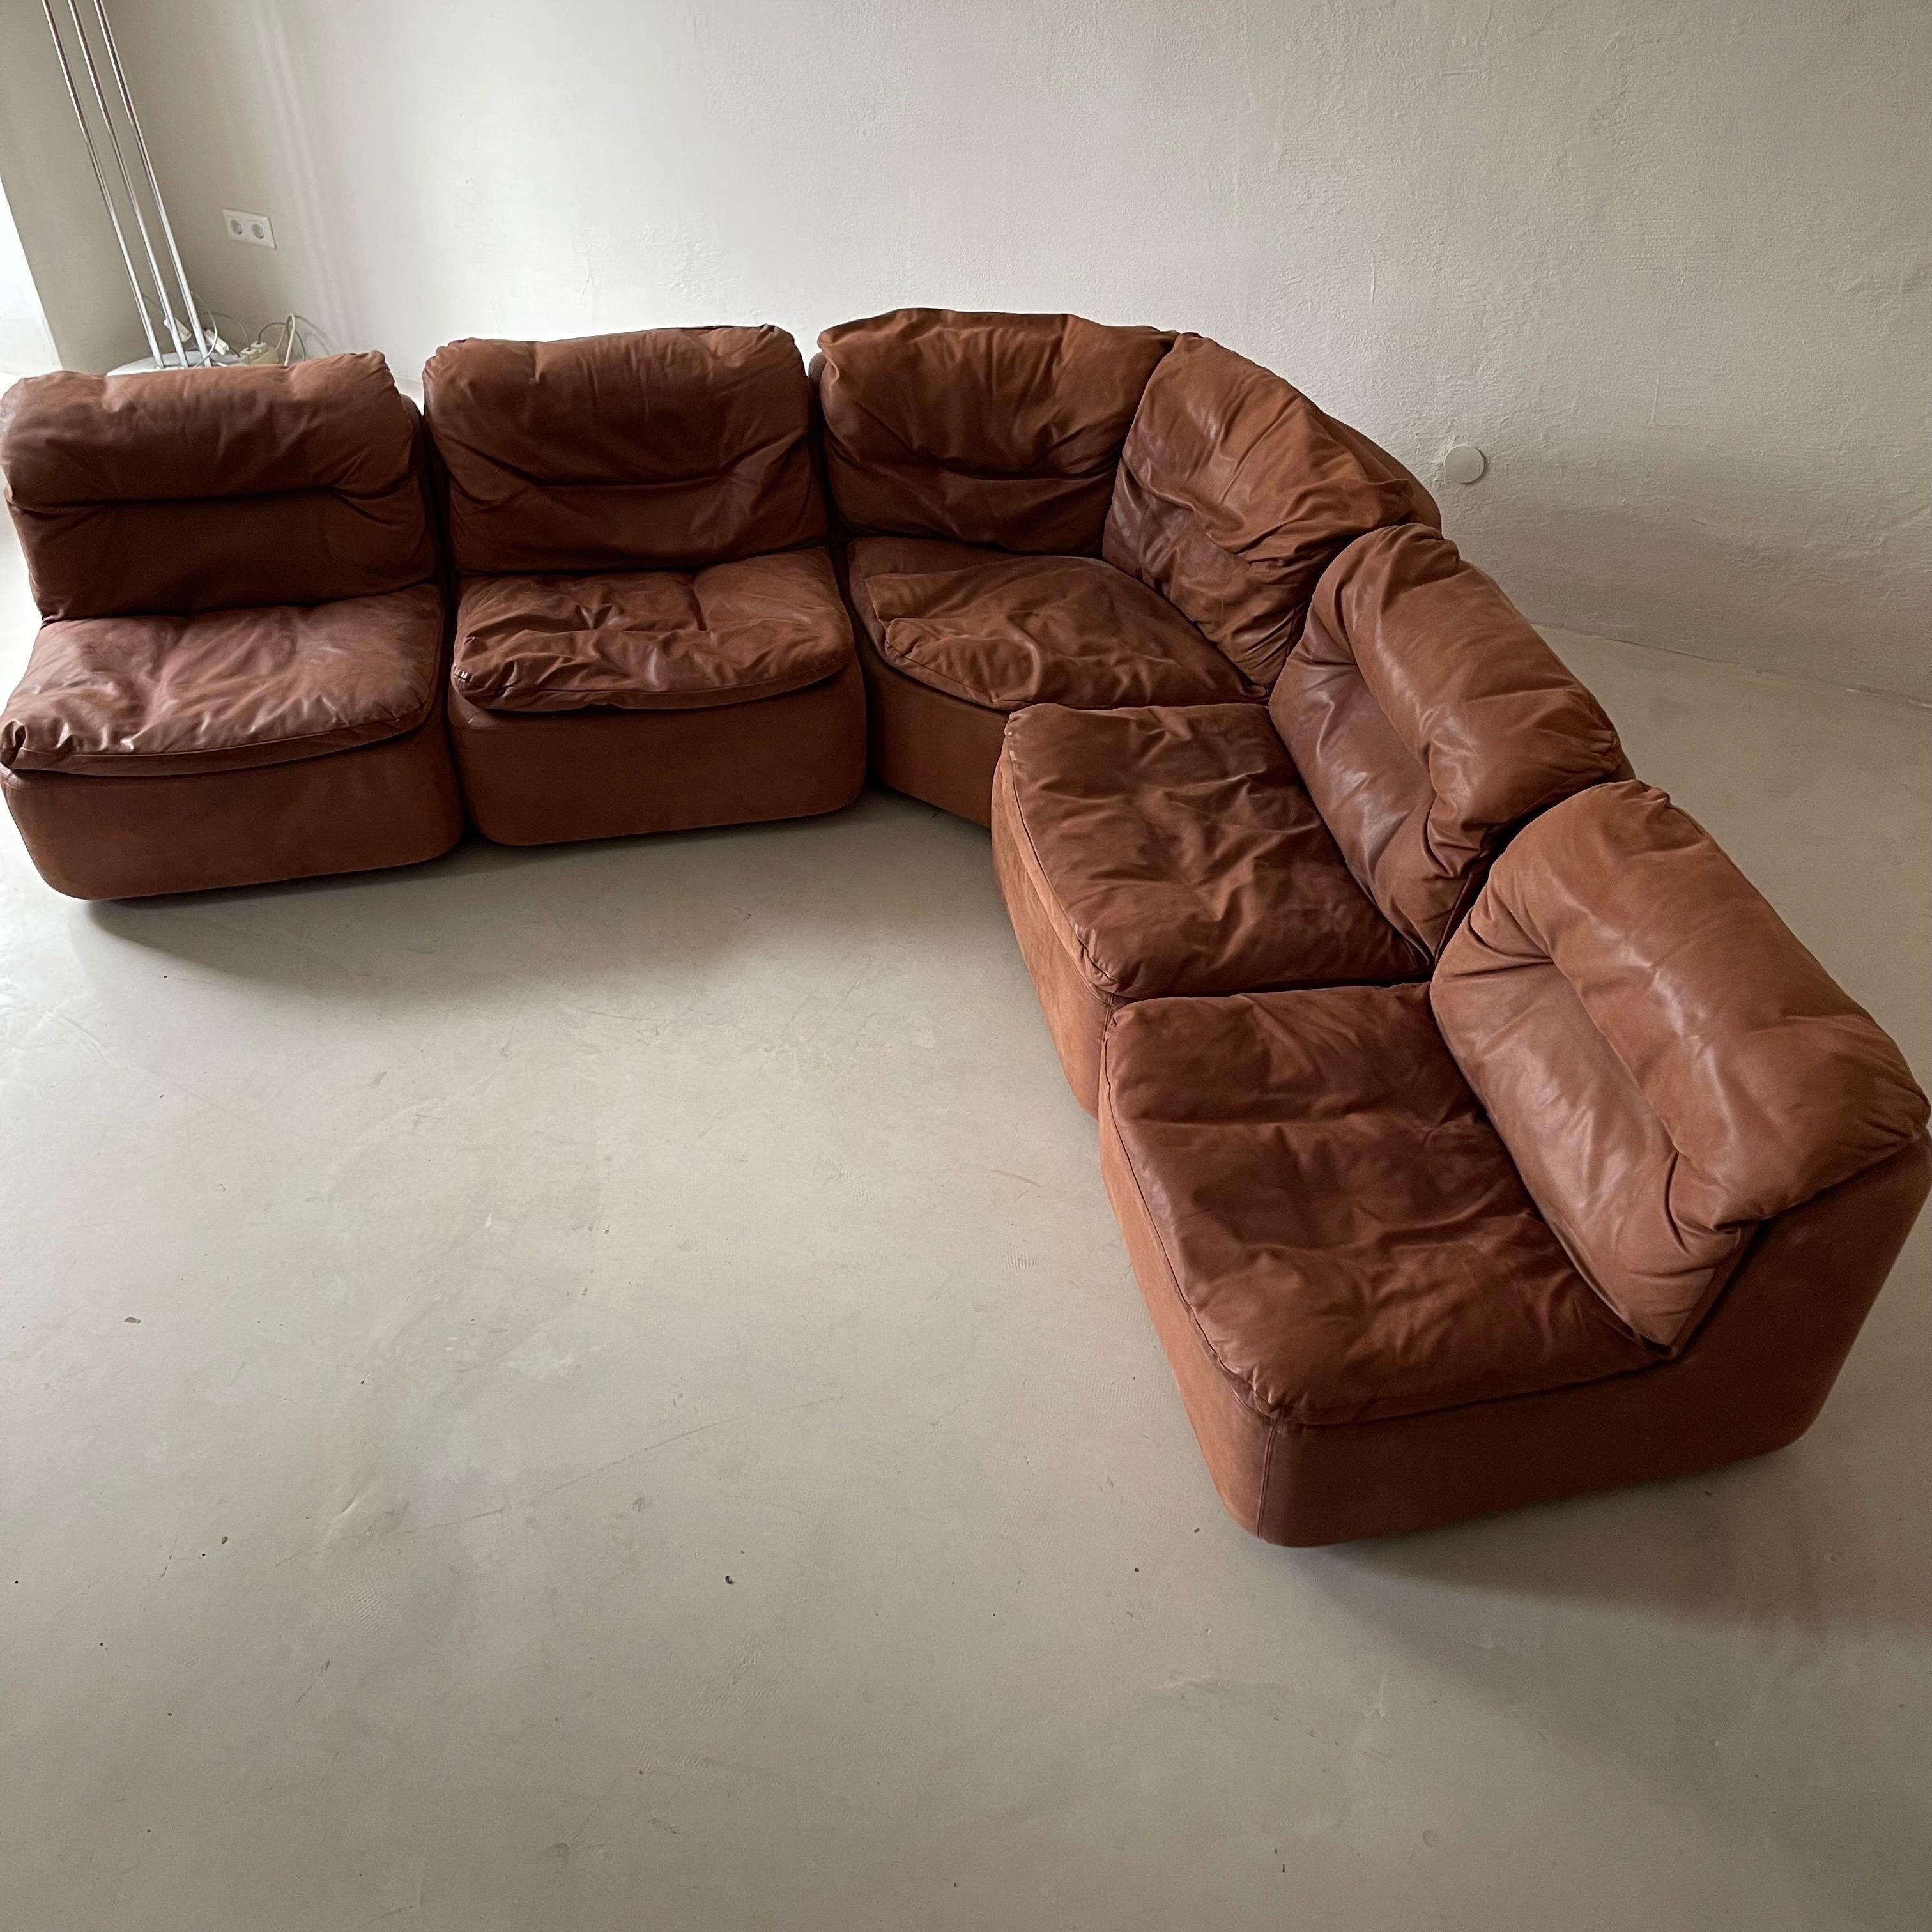 Vintage Modular Sofa by Friedrich Hill for Walter Knoll 1970s In Good Condition For Sale In Vienna, AT